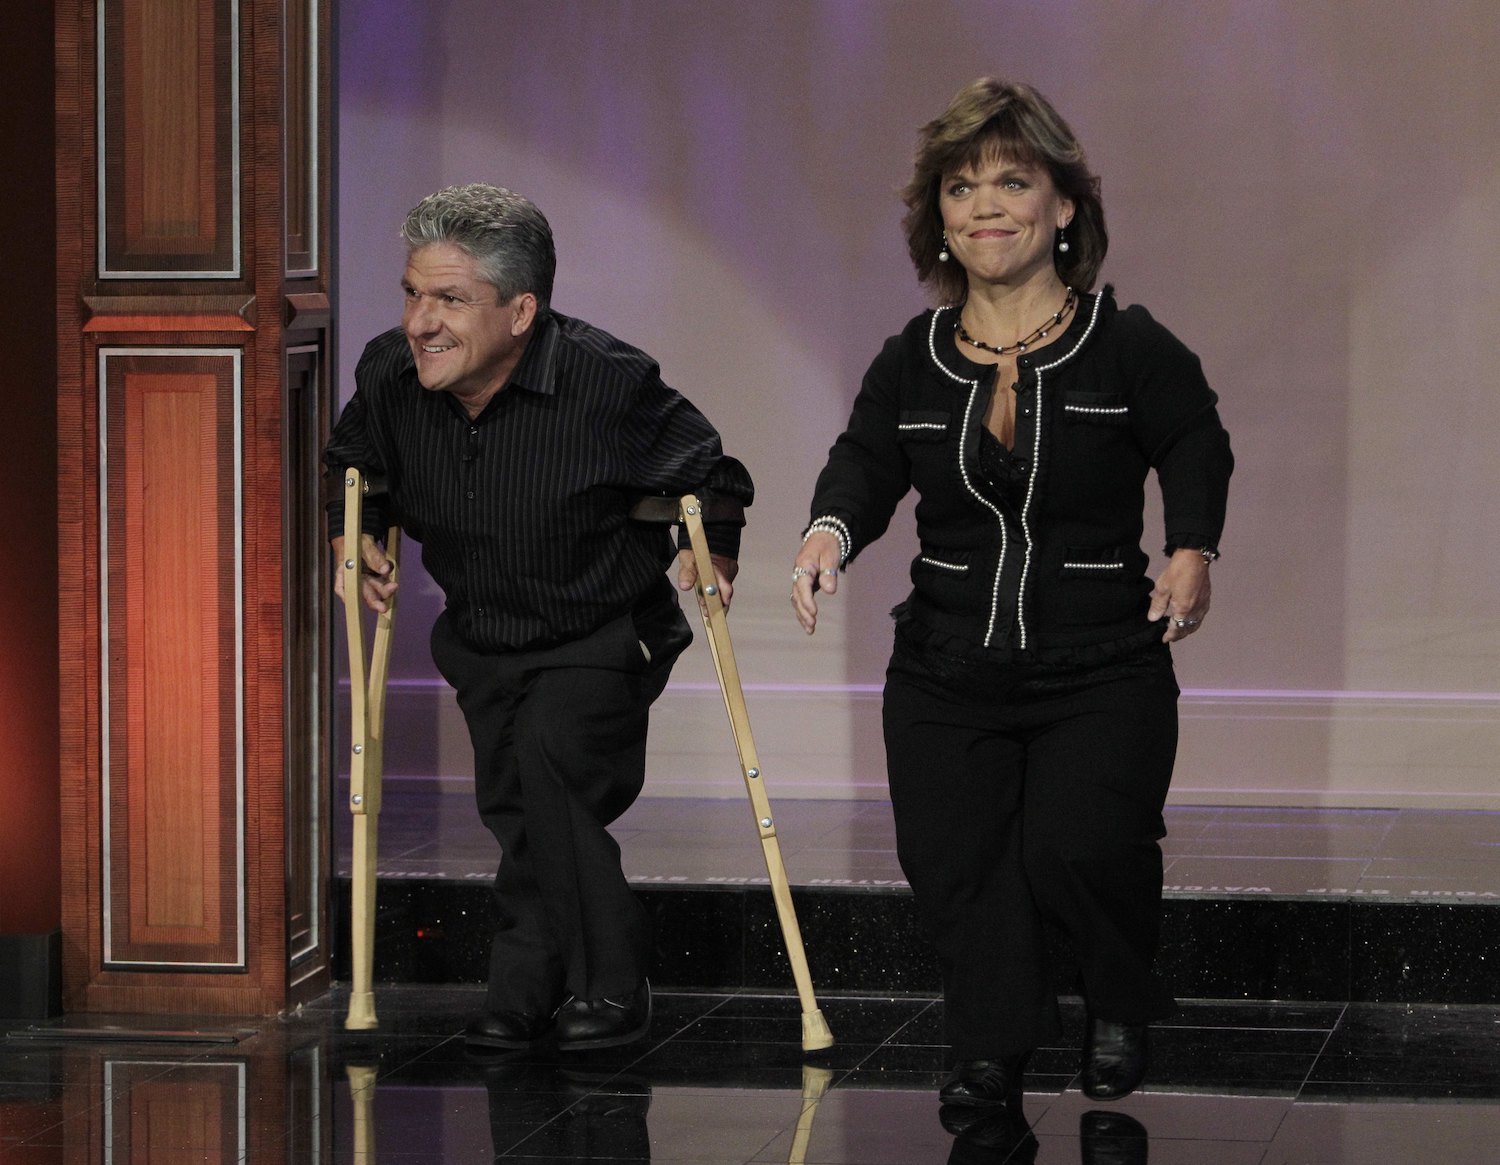 Matt and Amy Roloff from 'Little People, Big World' walking on a stage together